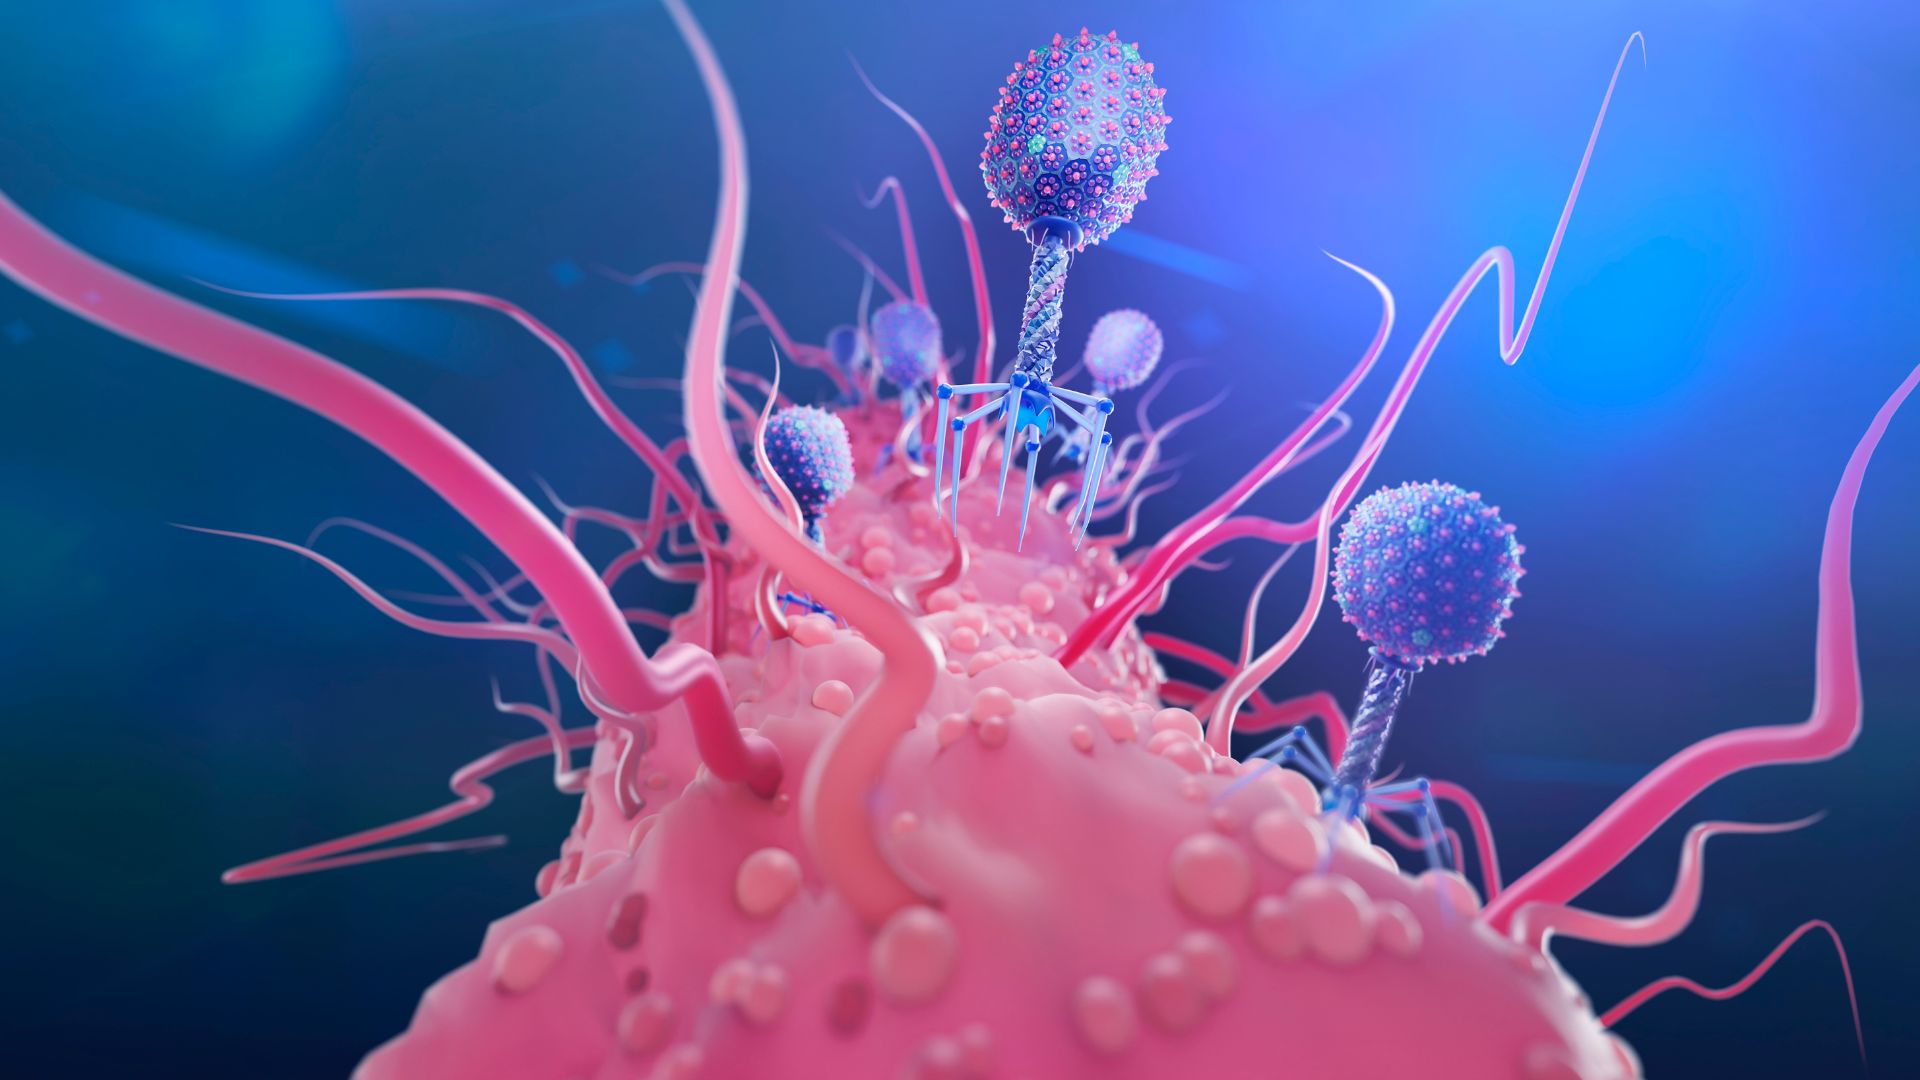 close up of a e. coli bacterial cell with wiggly projections. A large number of viruses can be seen landing on the part of the bacterium furthest from the viewer